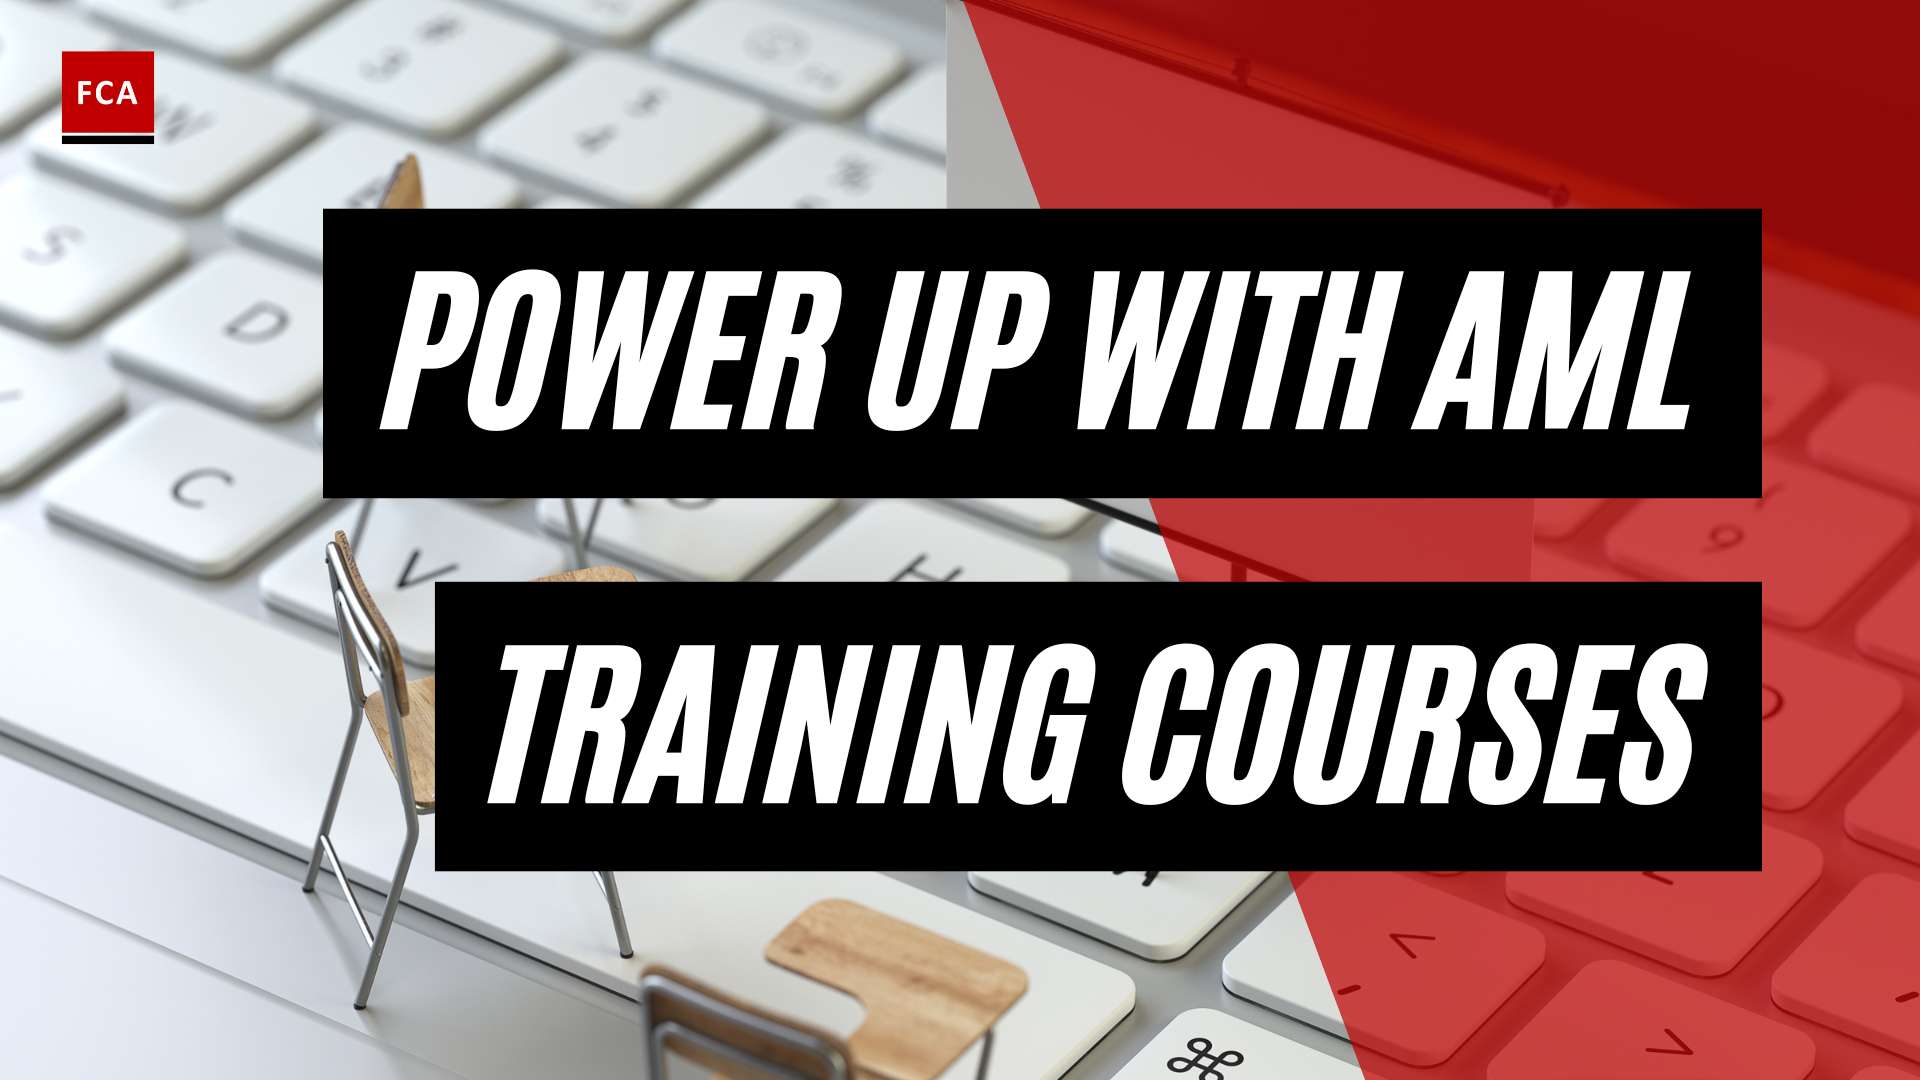 Defending Against Financial Crimes: Power Up With Aml Training Courses